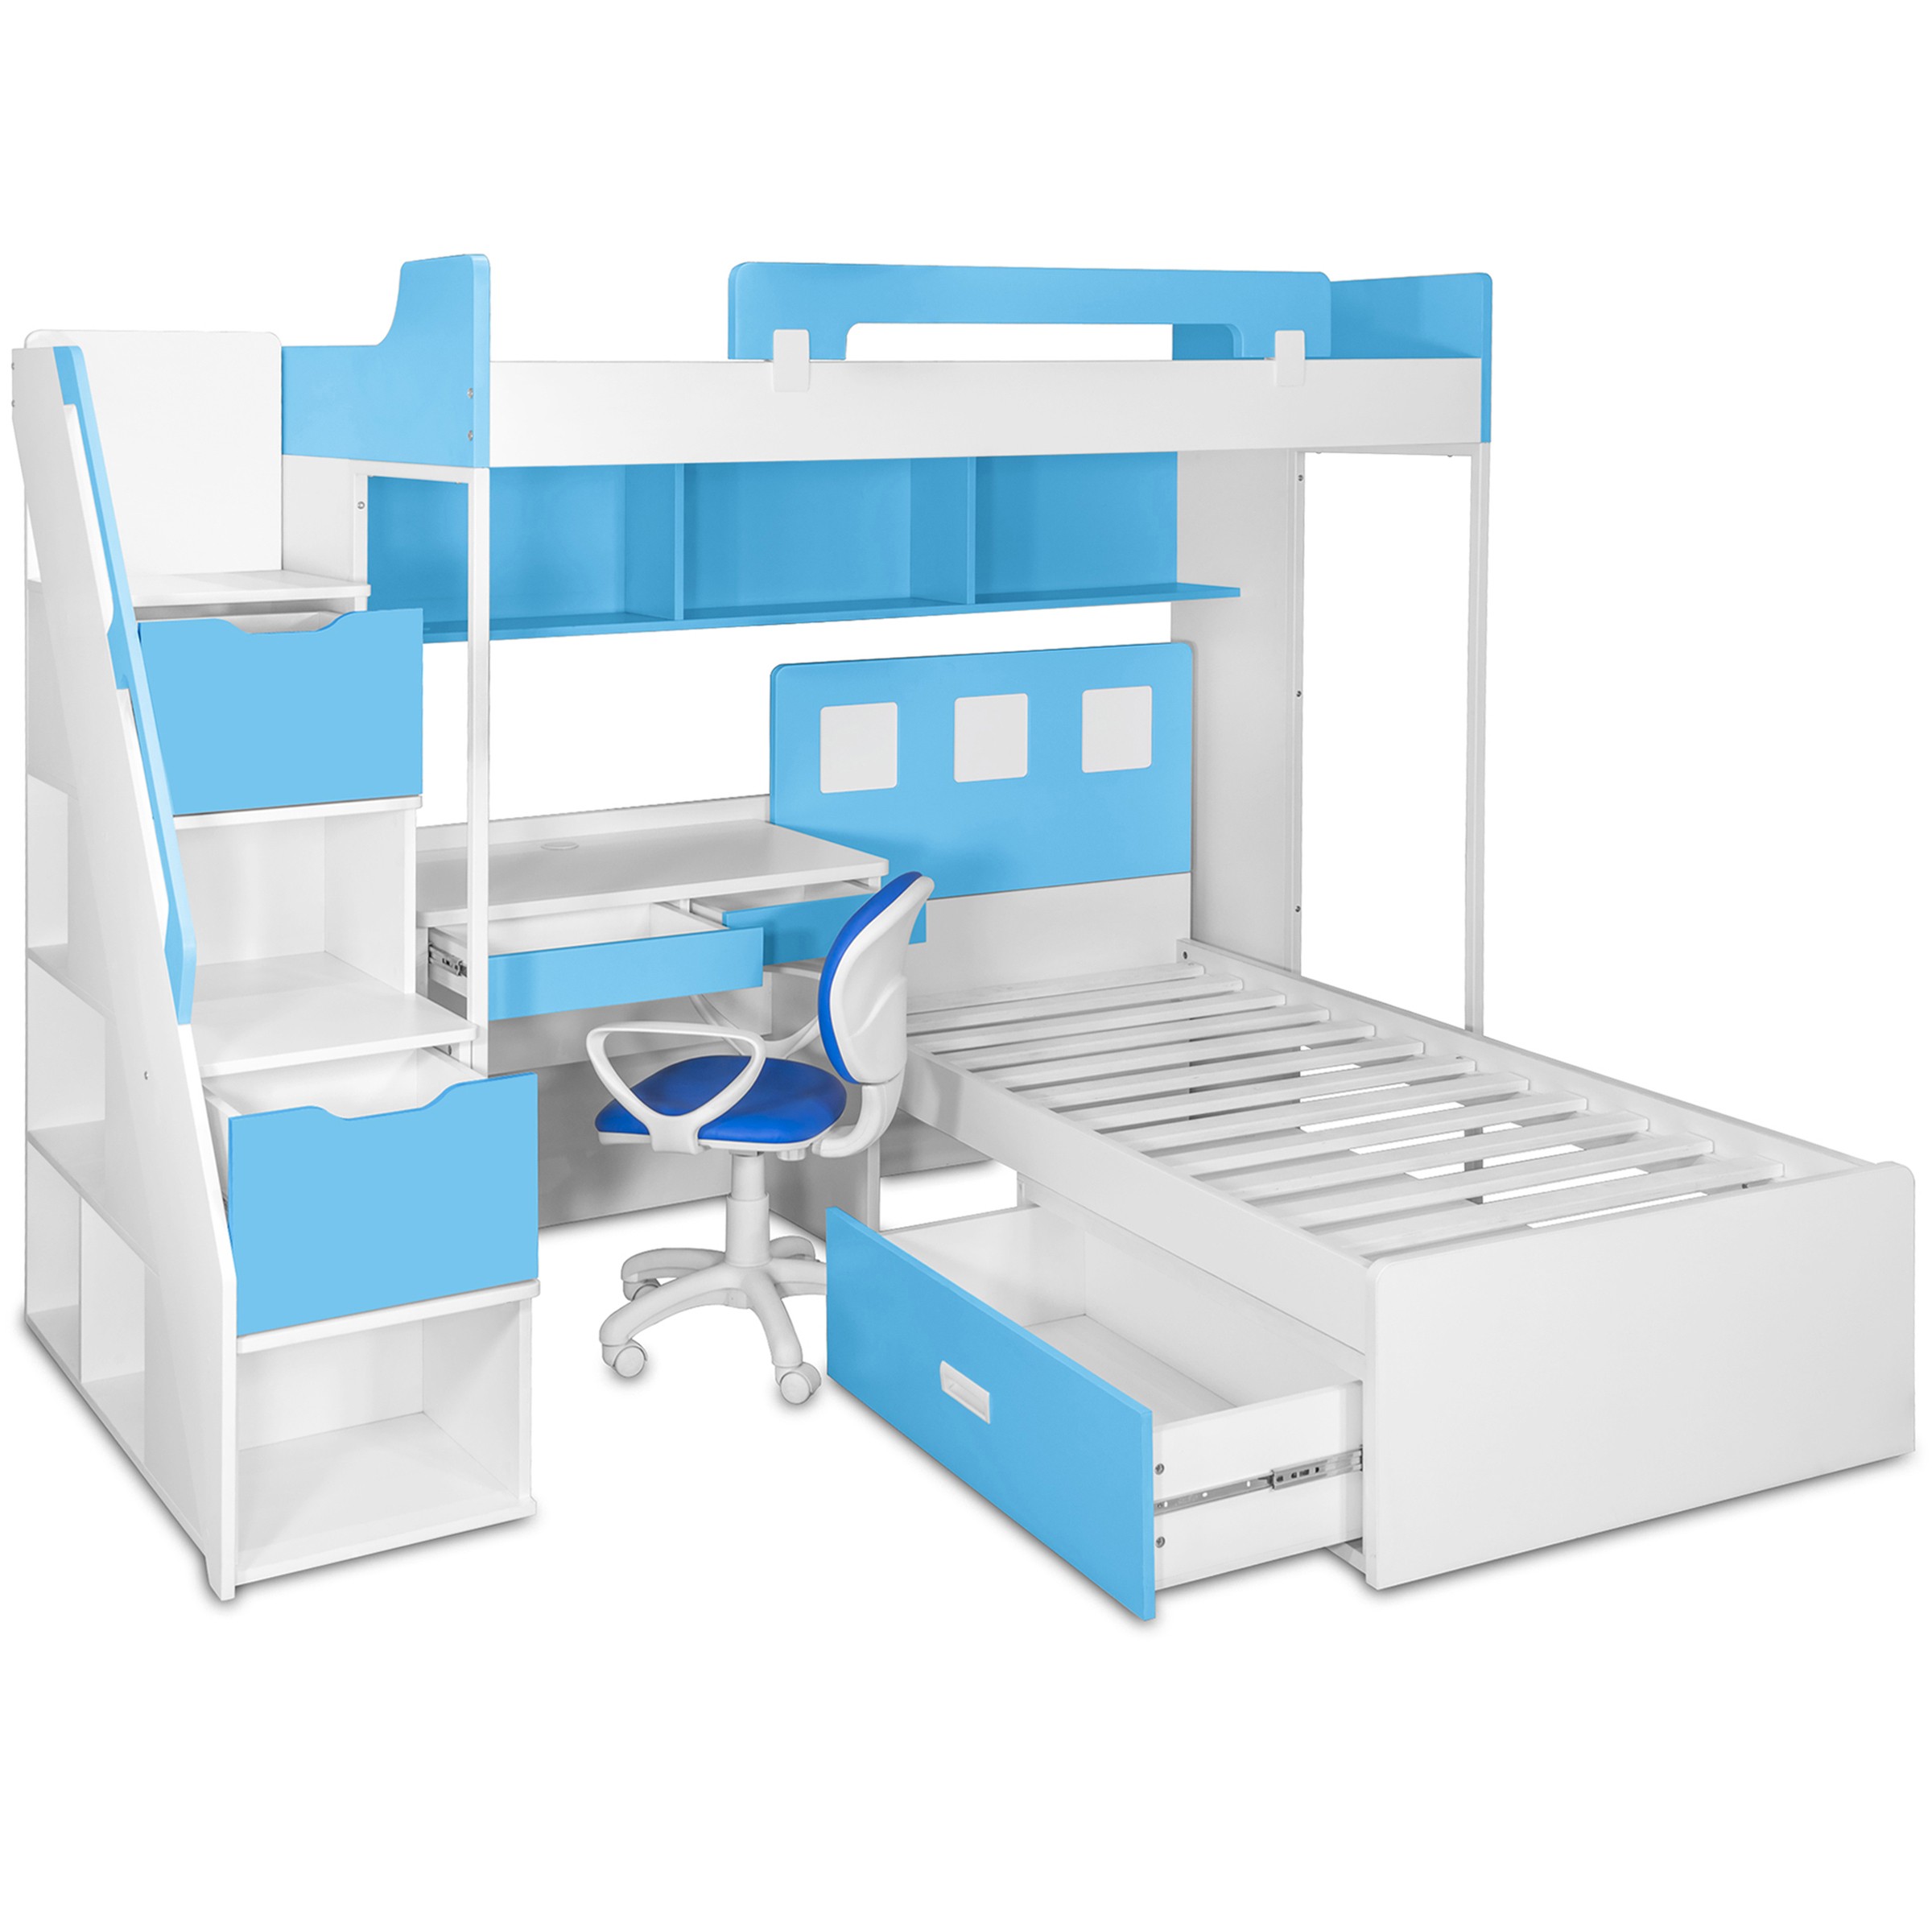 Milano bunk bed with study table chair kids bunk beds